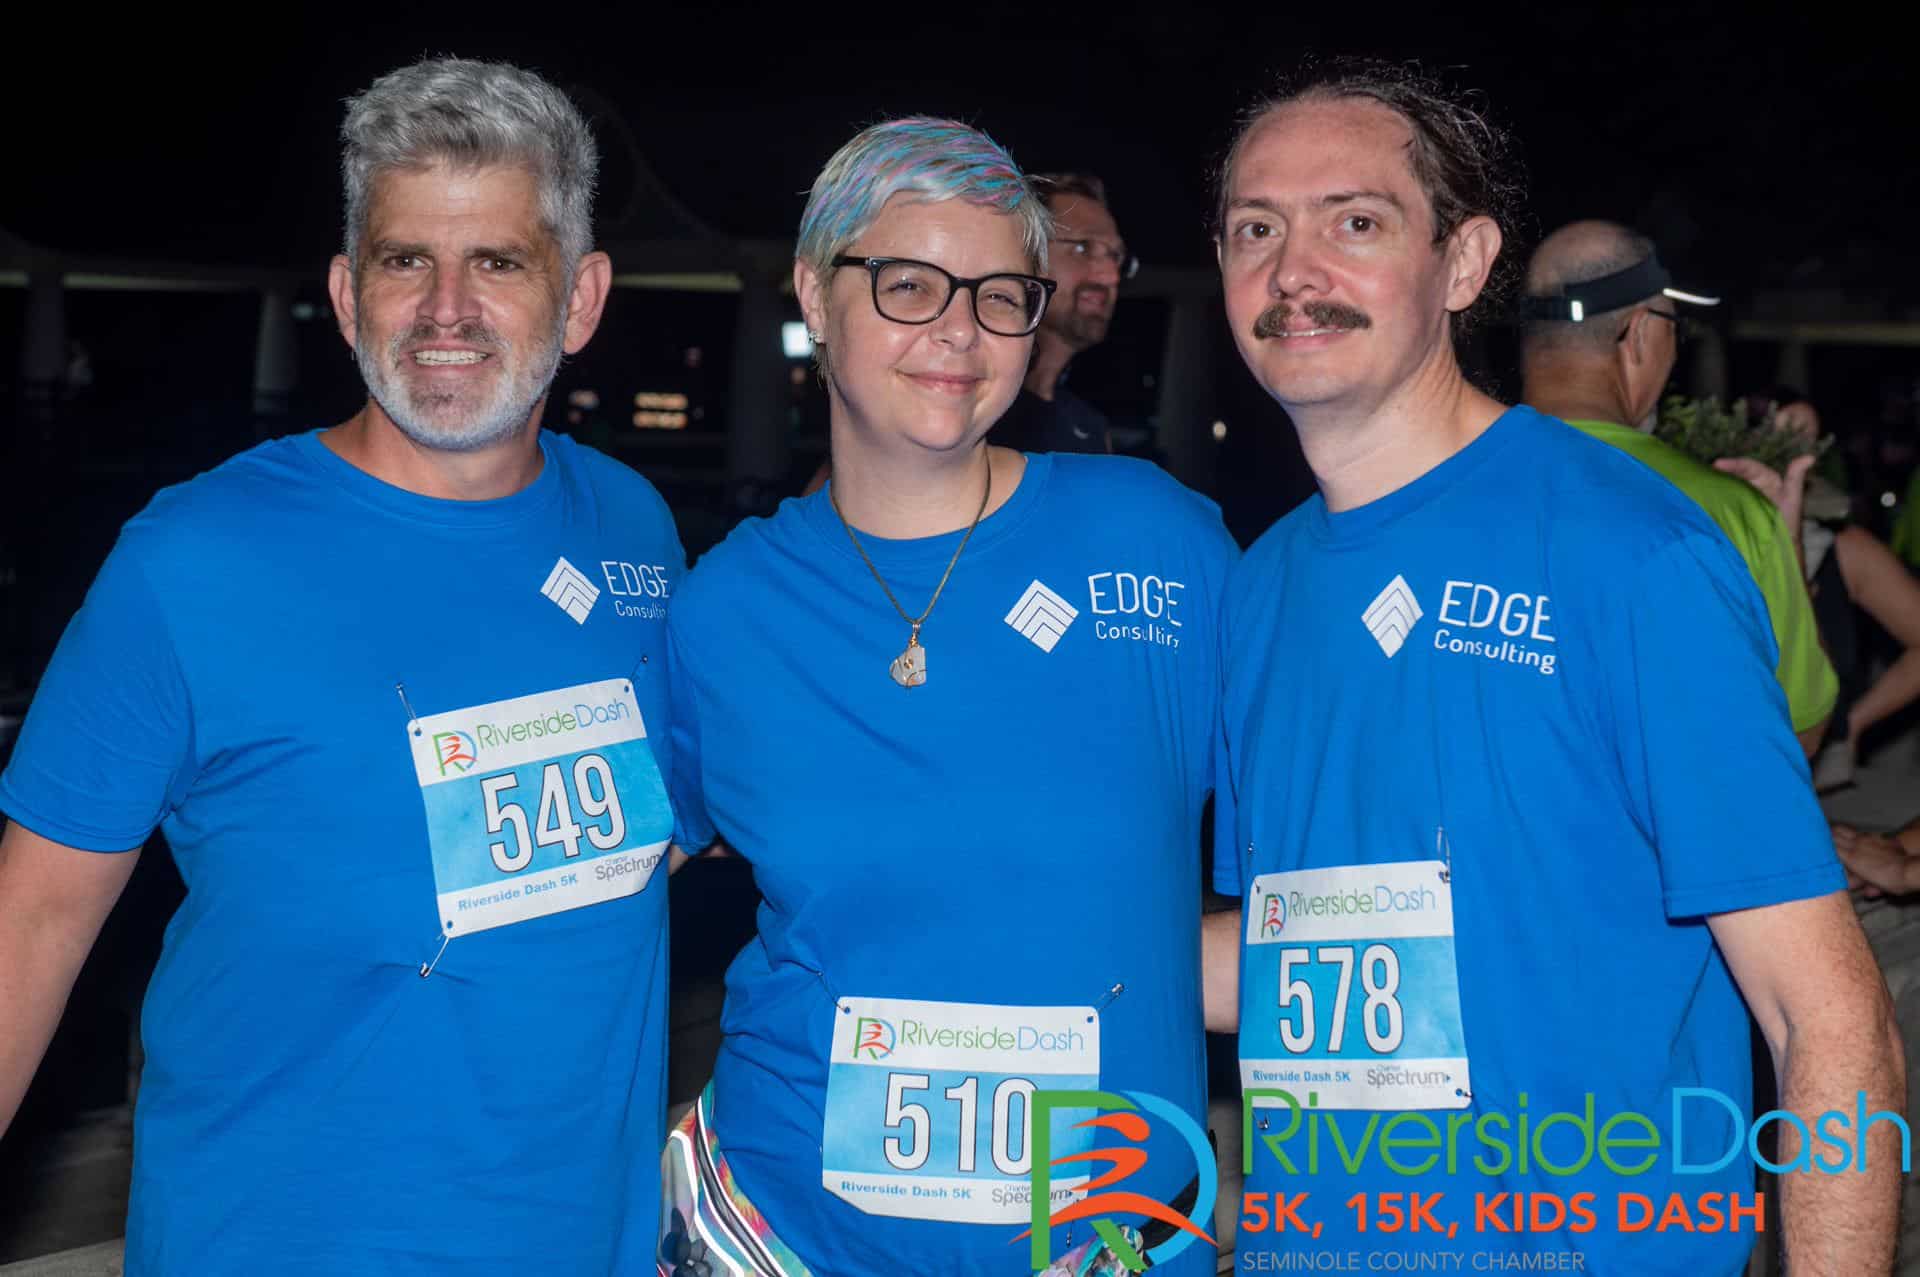 the Edge consulting team doing a community run